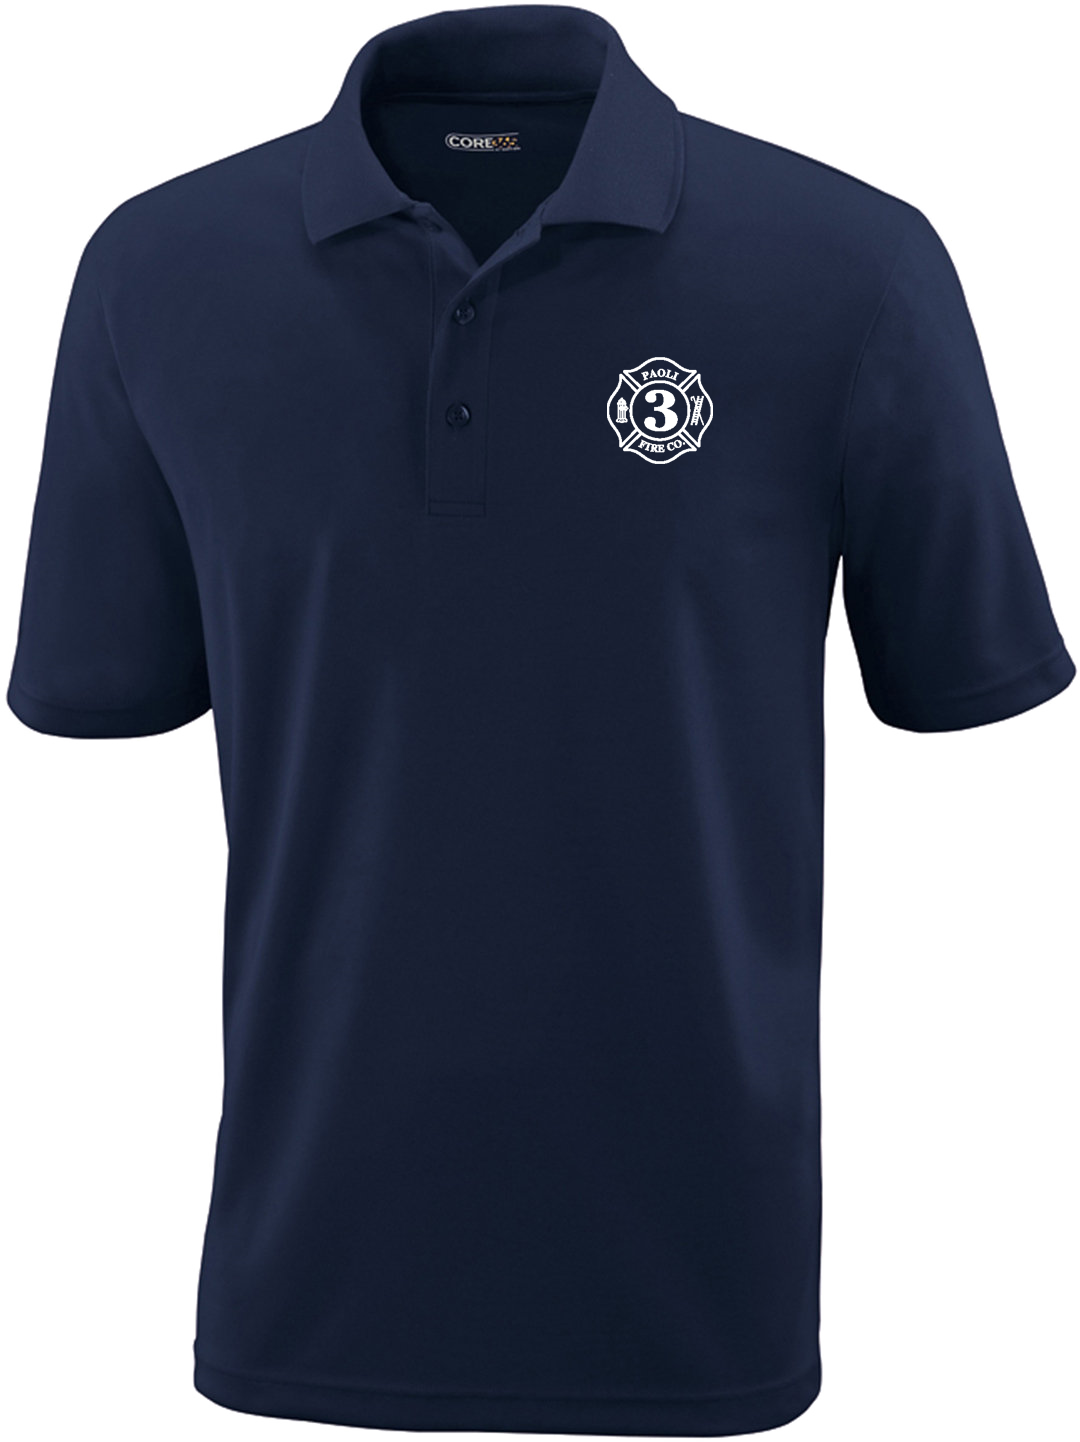 PFC Performance Polo -CLASSIC NAVY